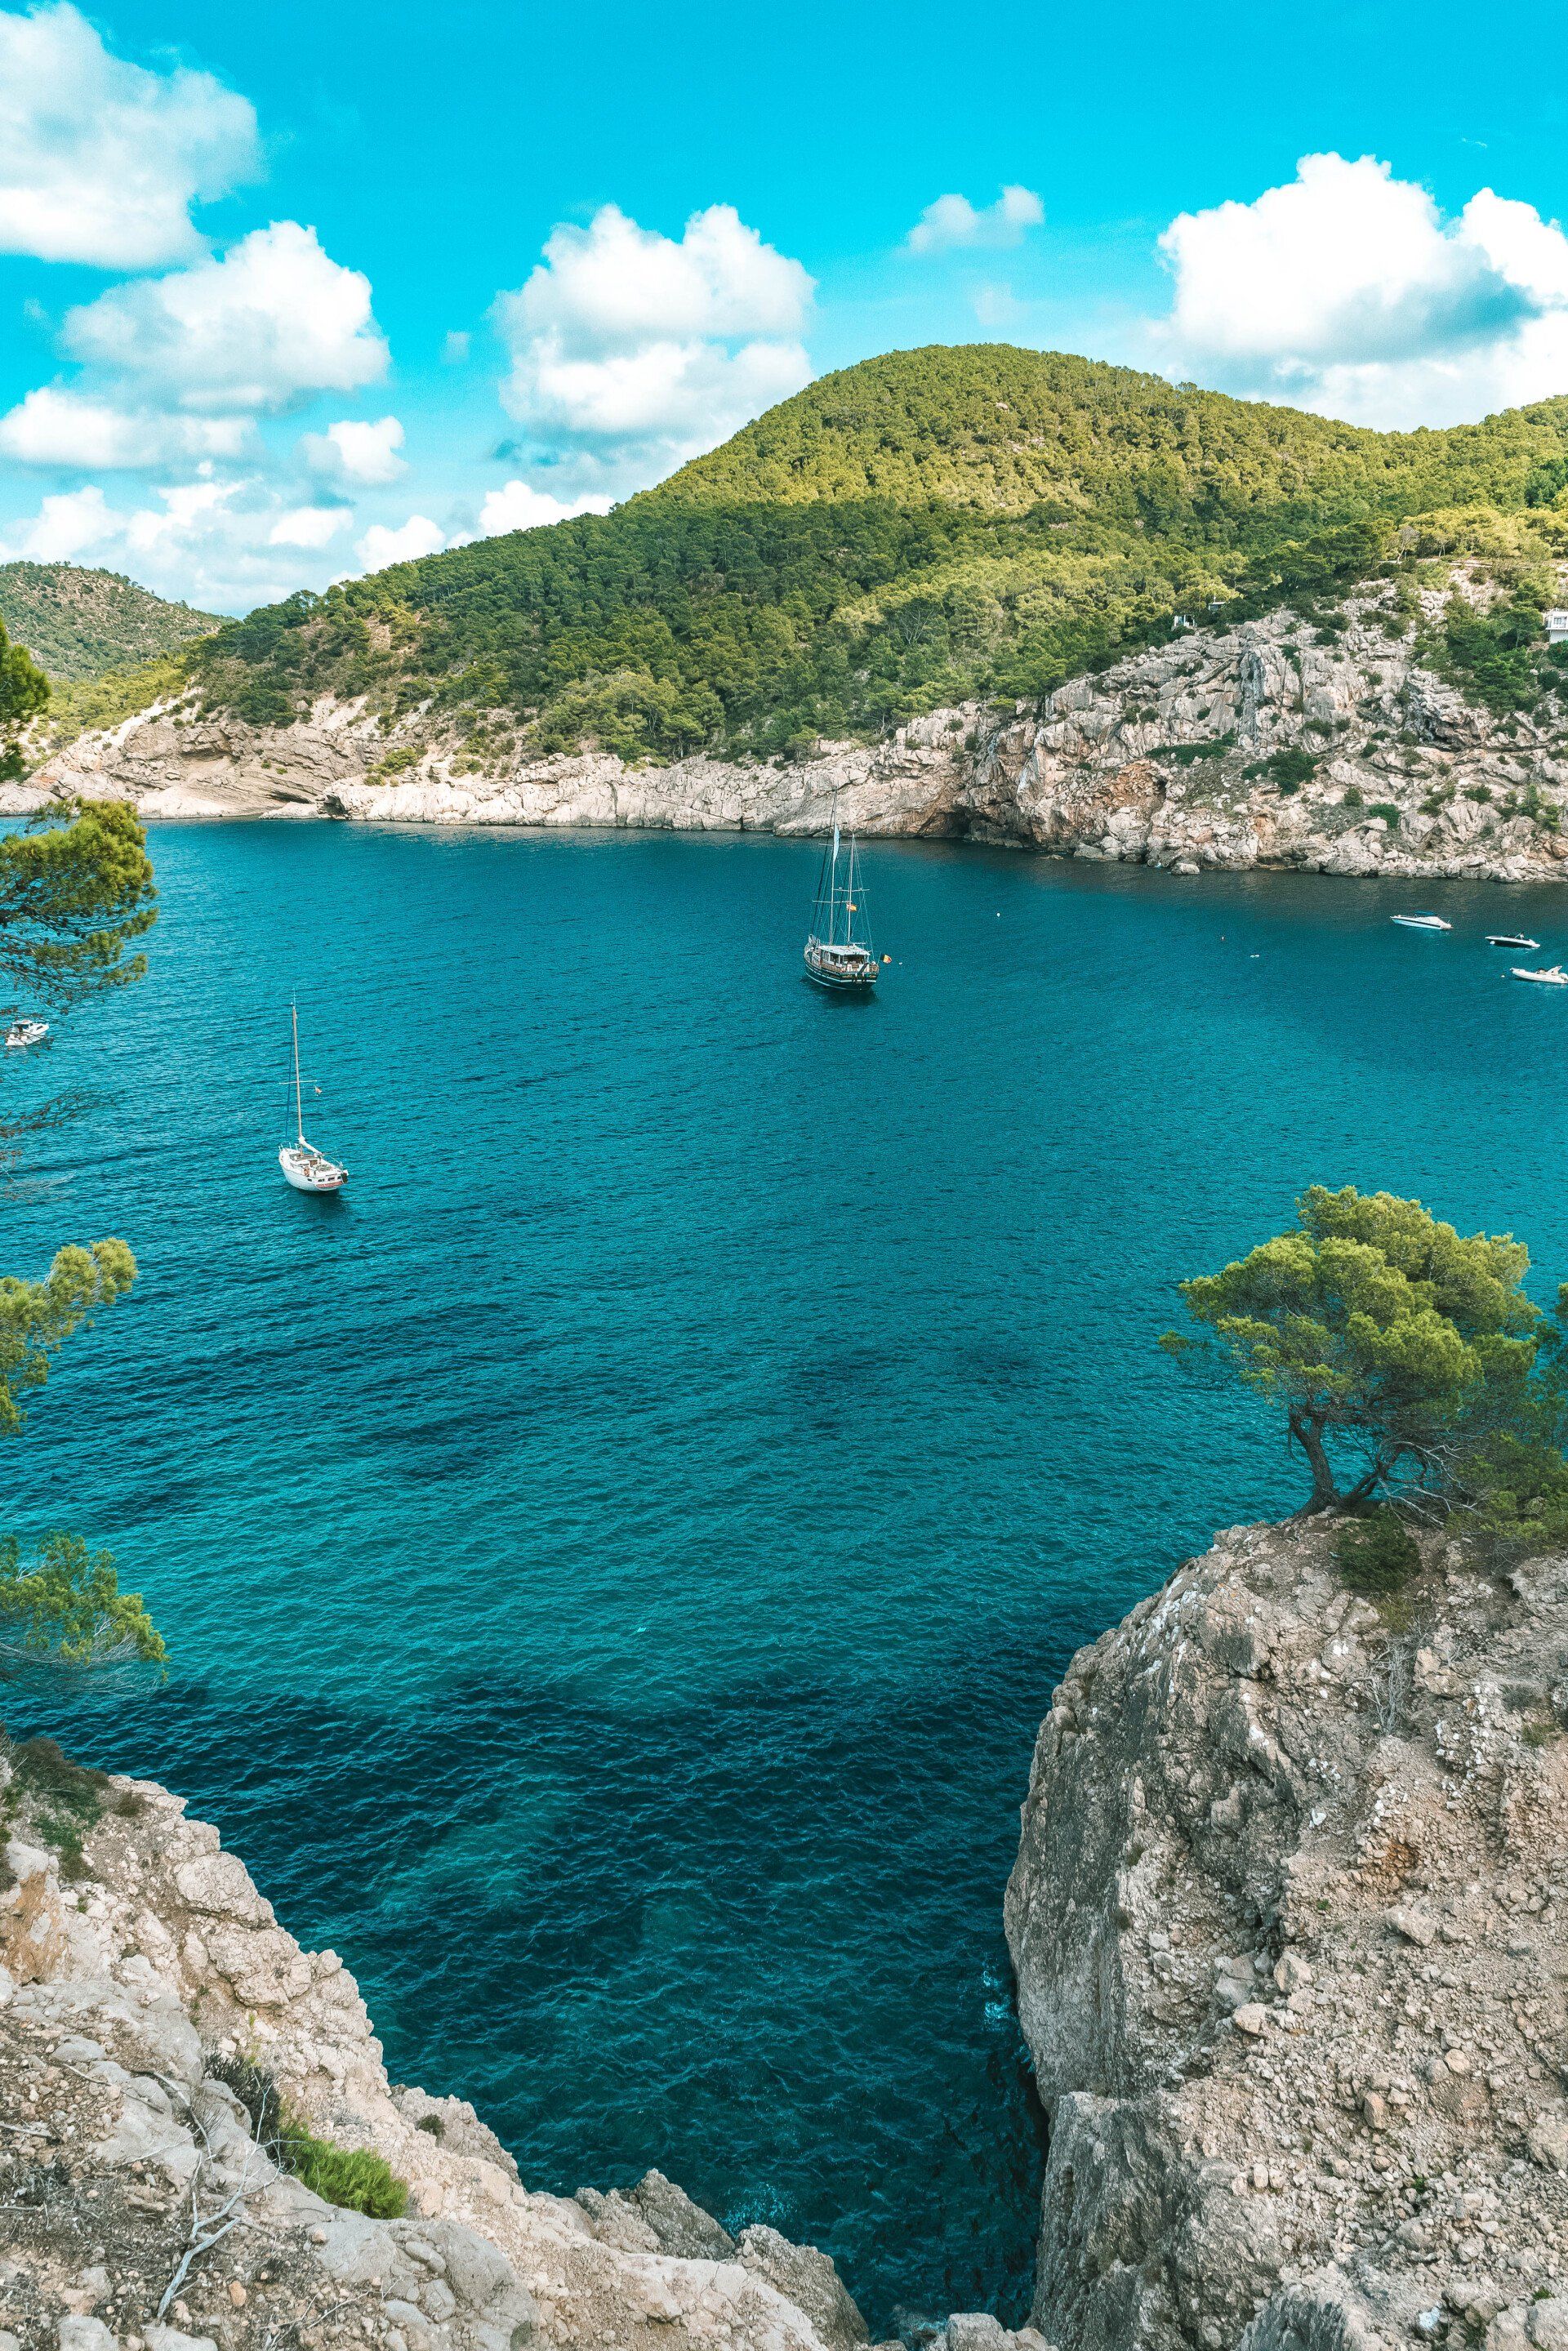 Beautiful Coastal View of the Blue Ocean with 2 Boats in Ibiza, Spain - Ibiza Holidays Barter's Travelnet